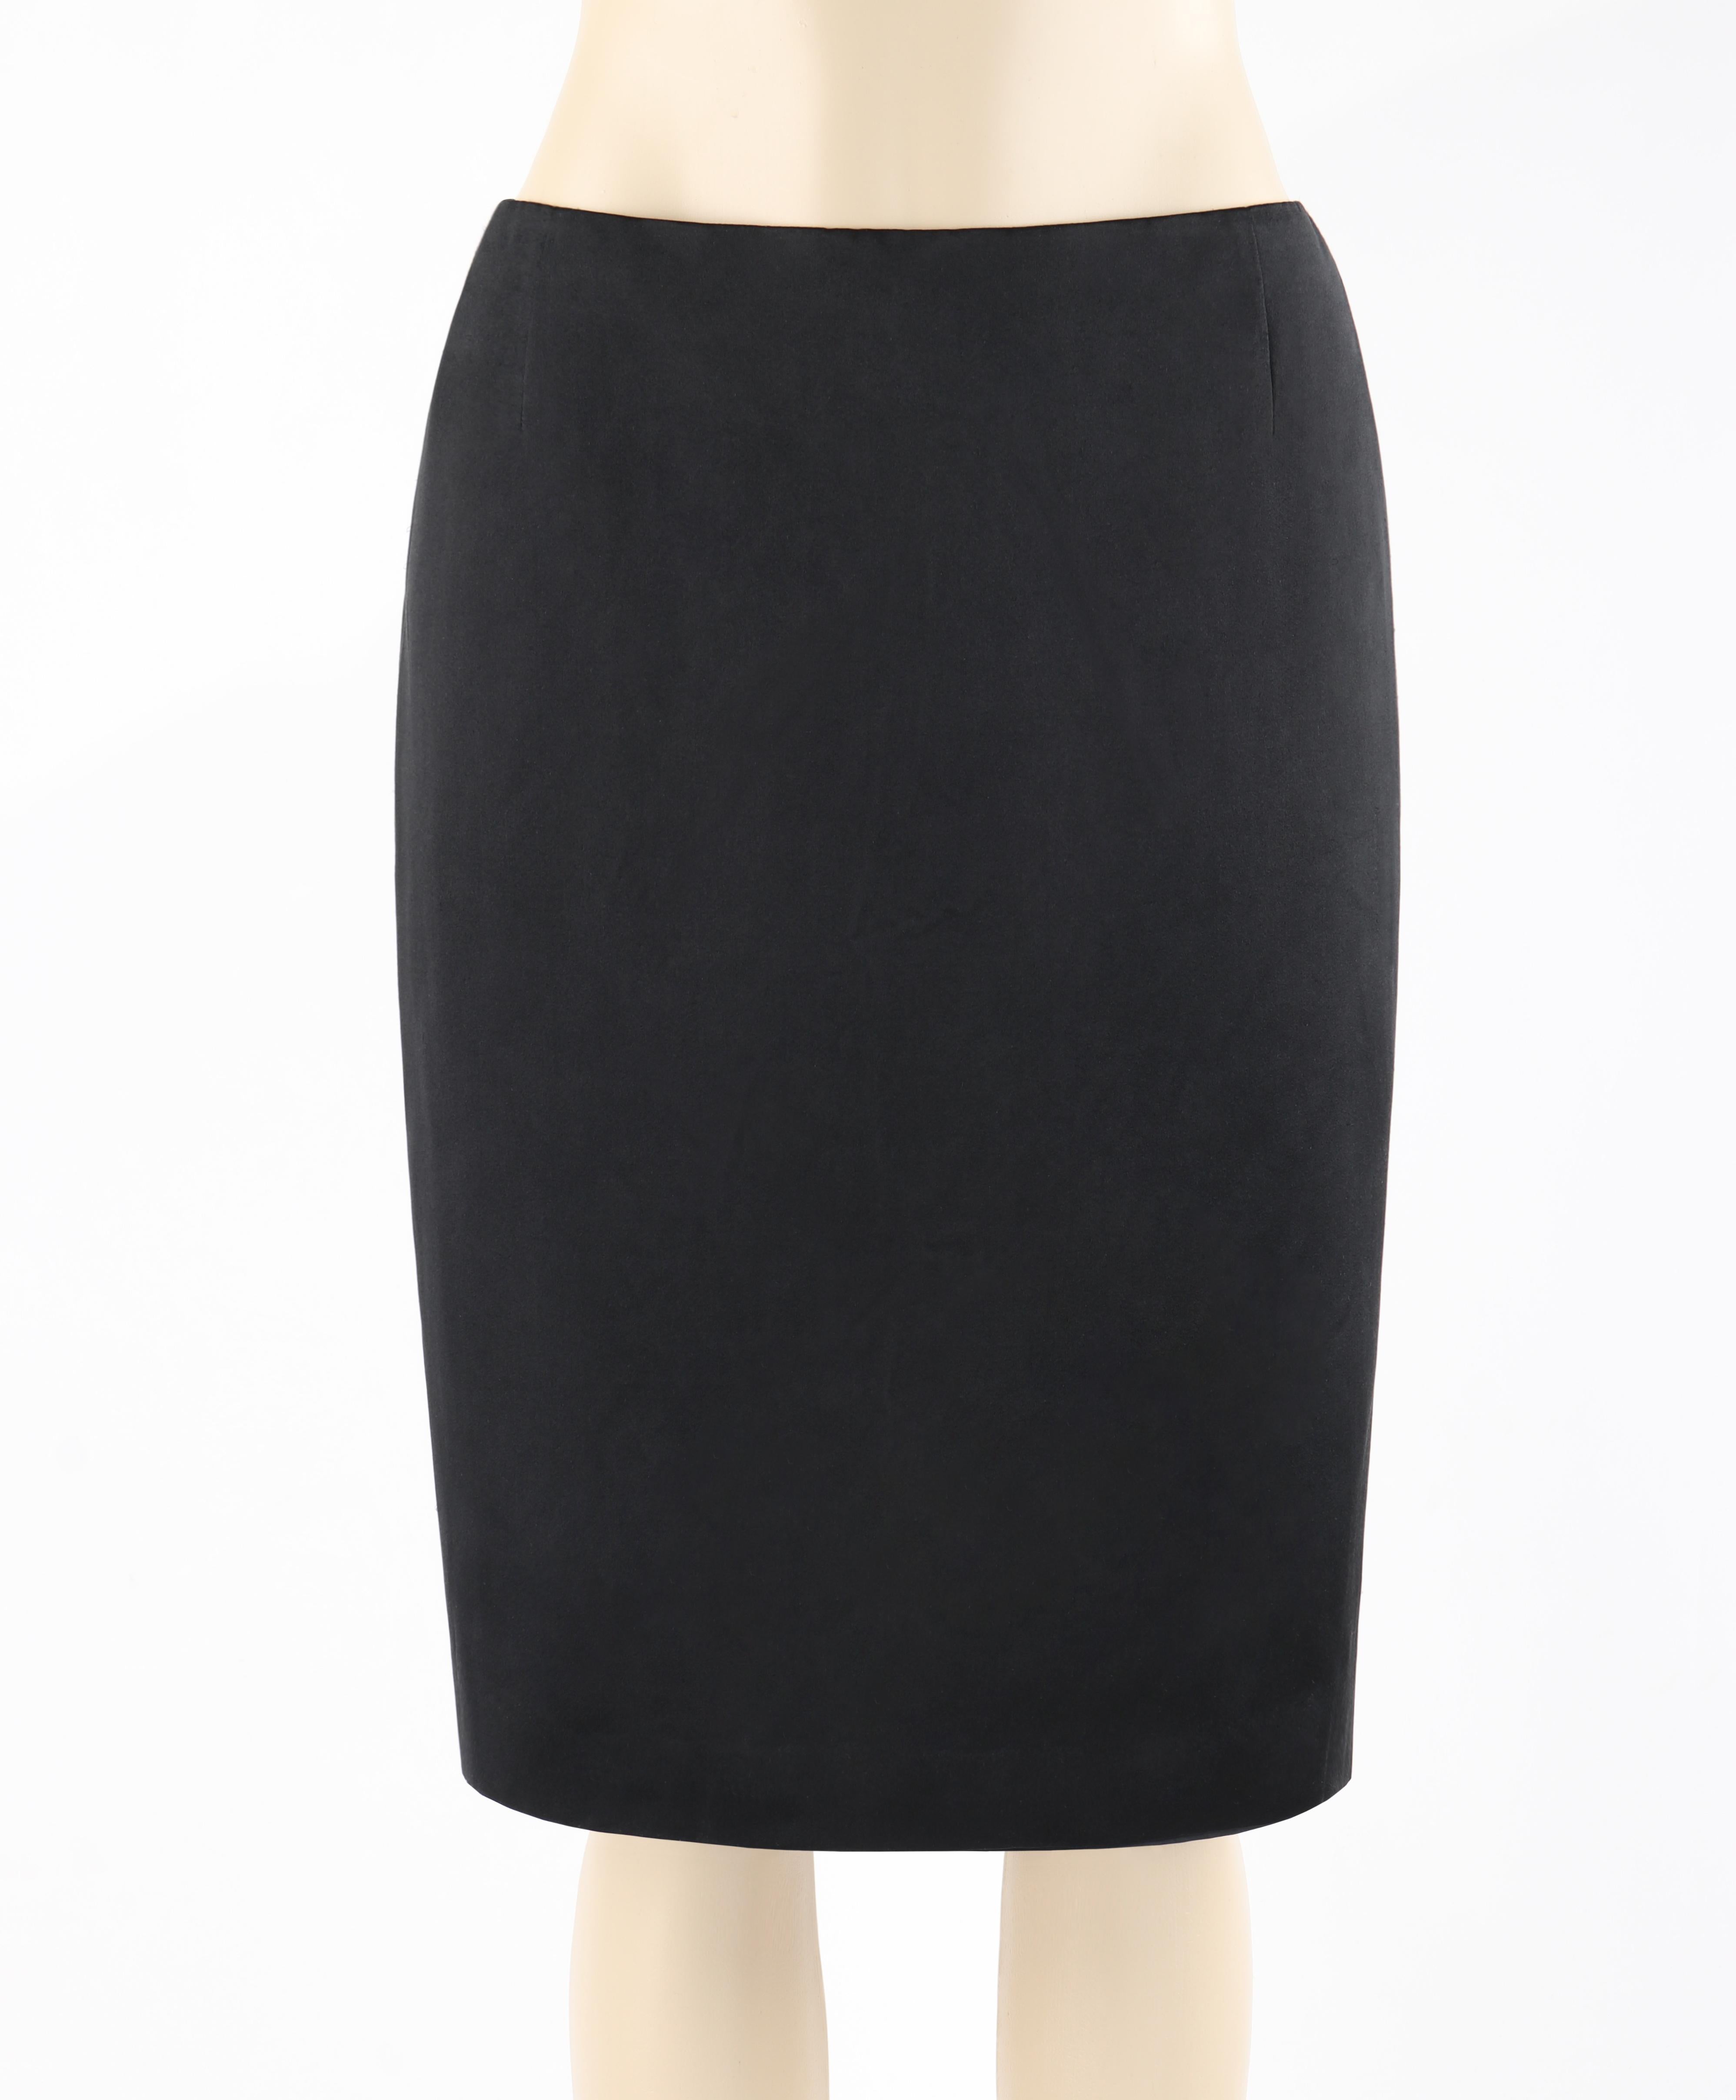 A timeless classic ALEXANDER McQUEEN black pencil skirt addition to your wardrobe!

ALEXANDER McQUEEN S/S 2008 